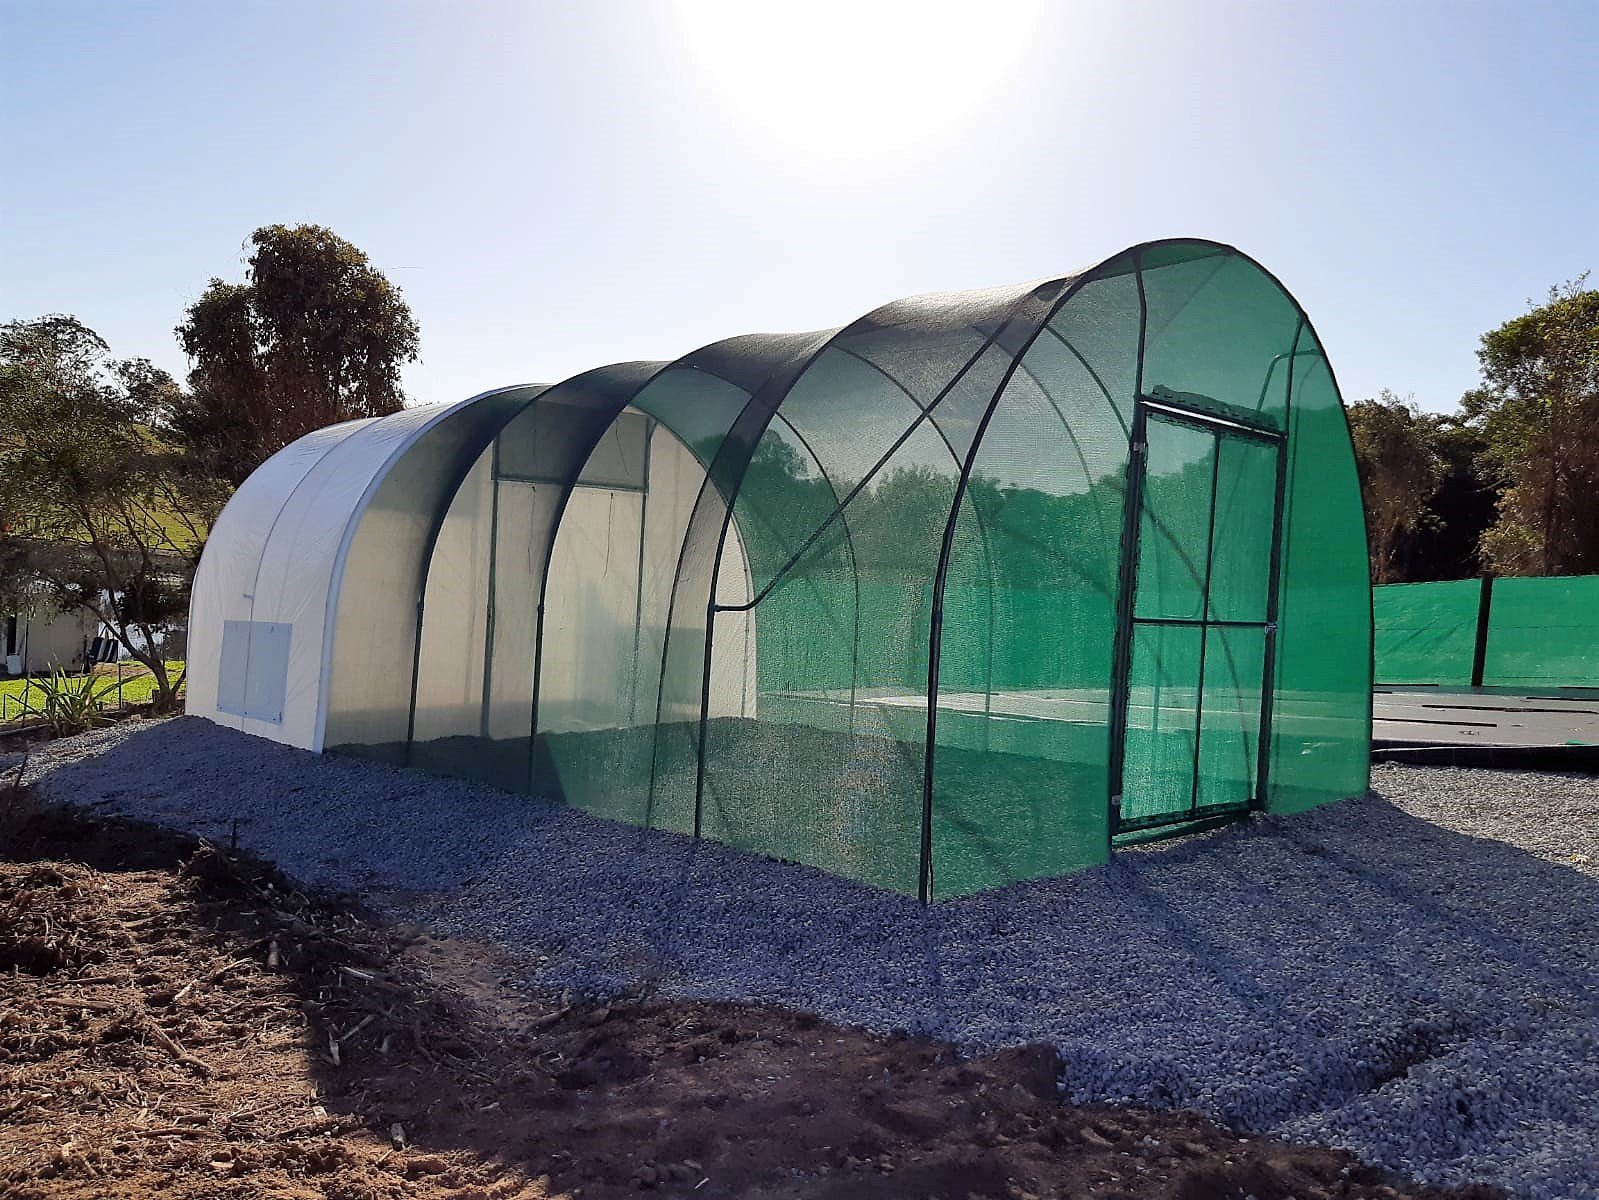 Featured image for “Shadecloth versus Plastic? Selecting Greenhouse Covers”